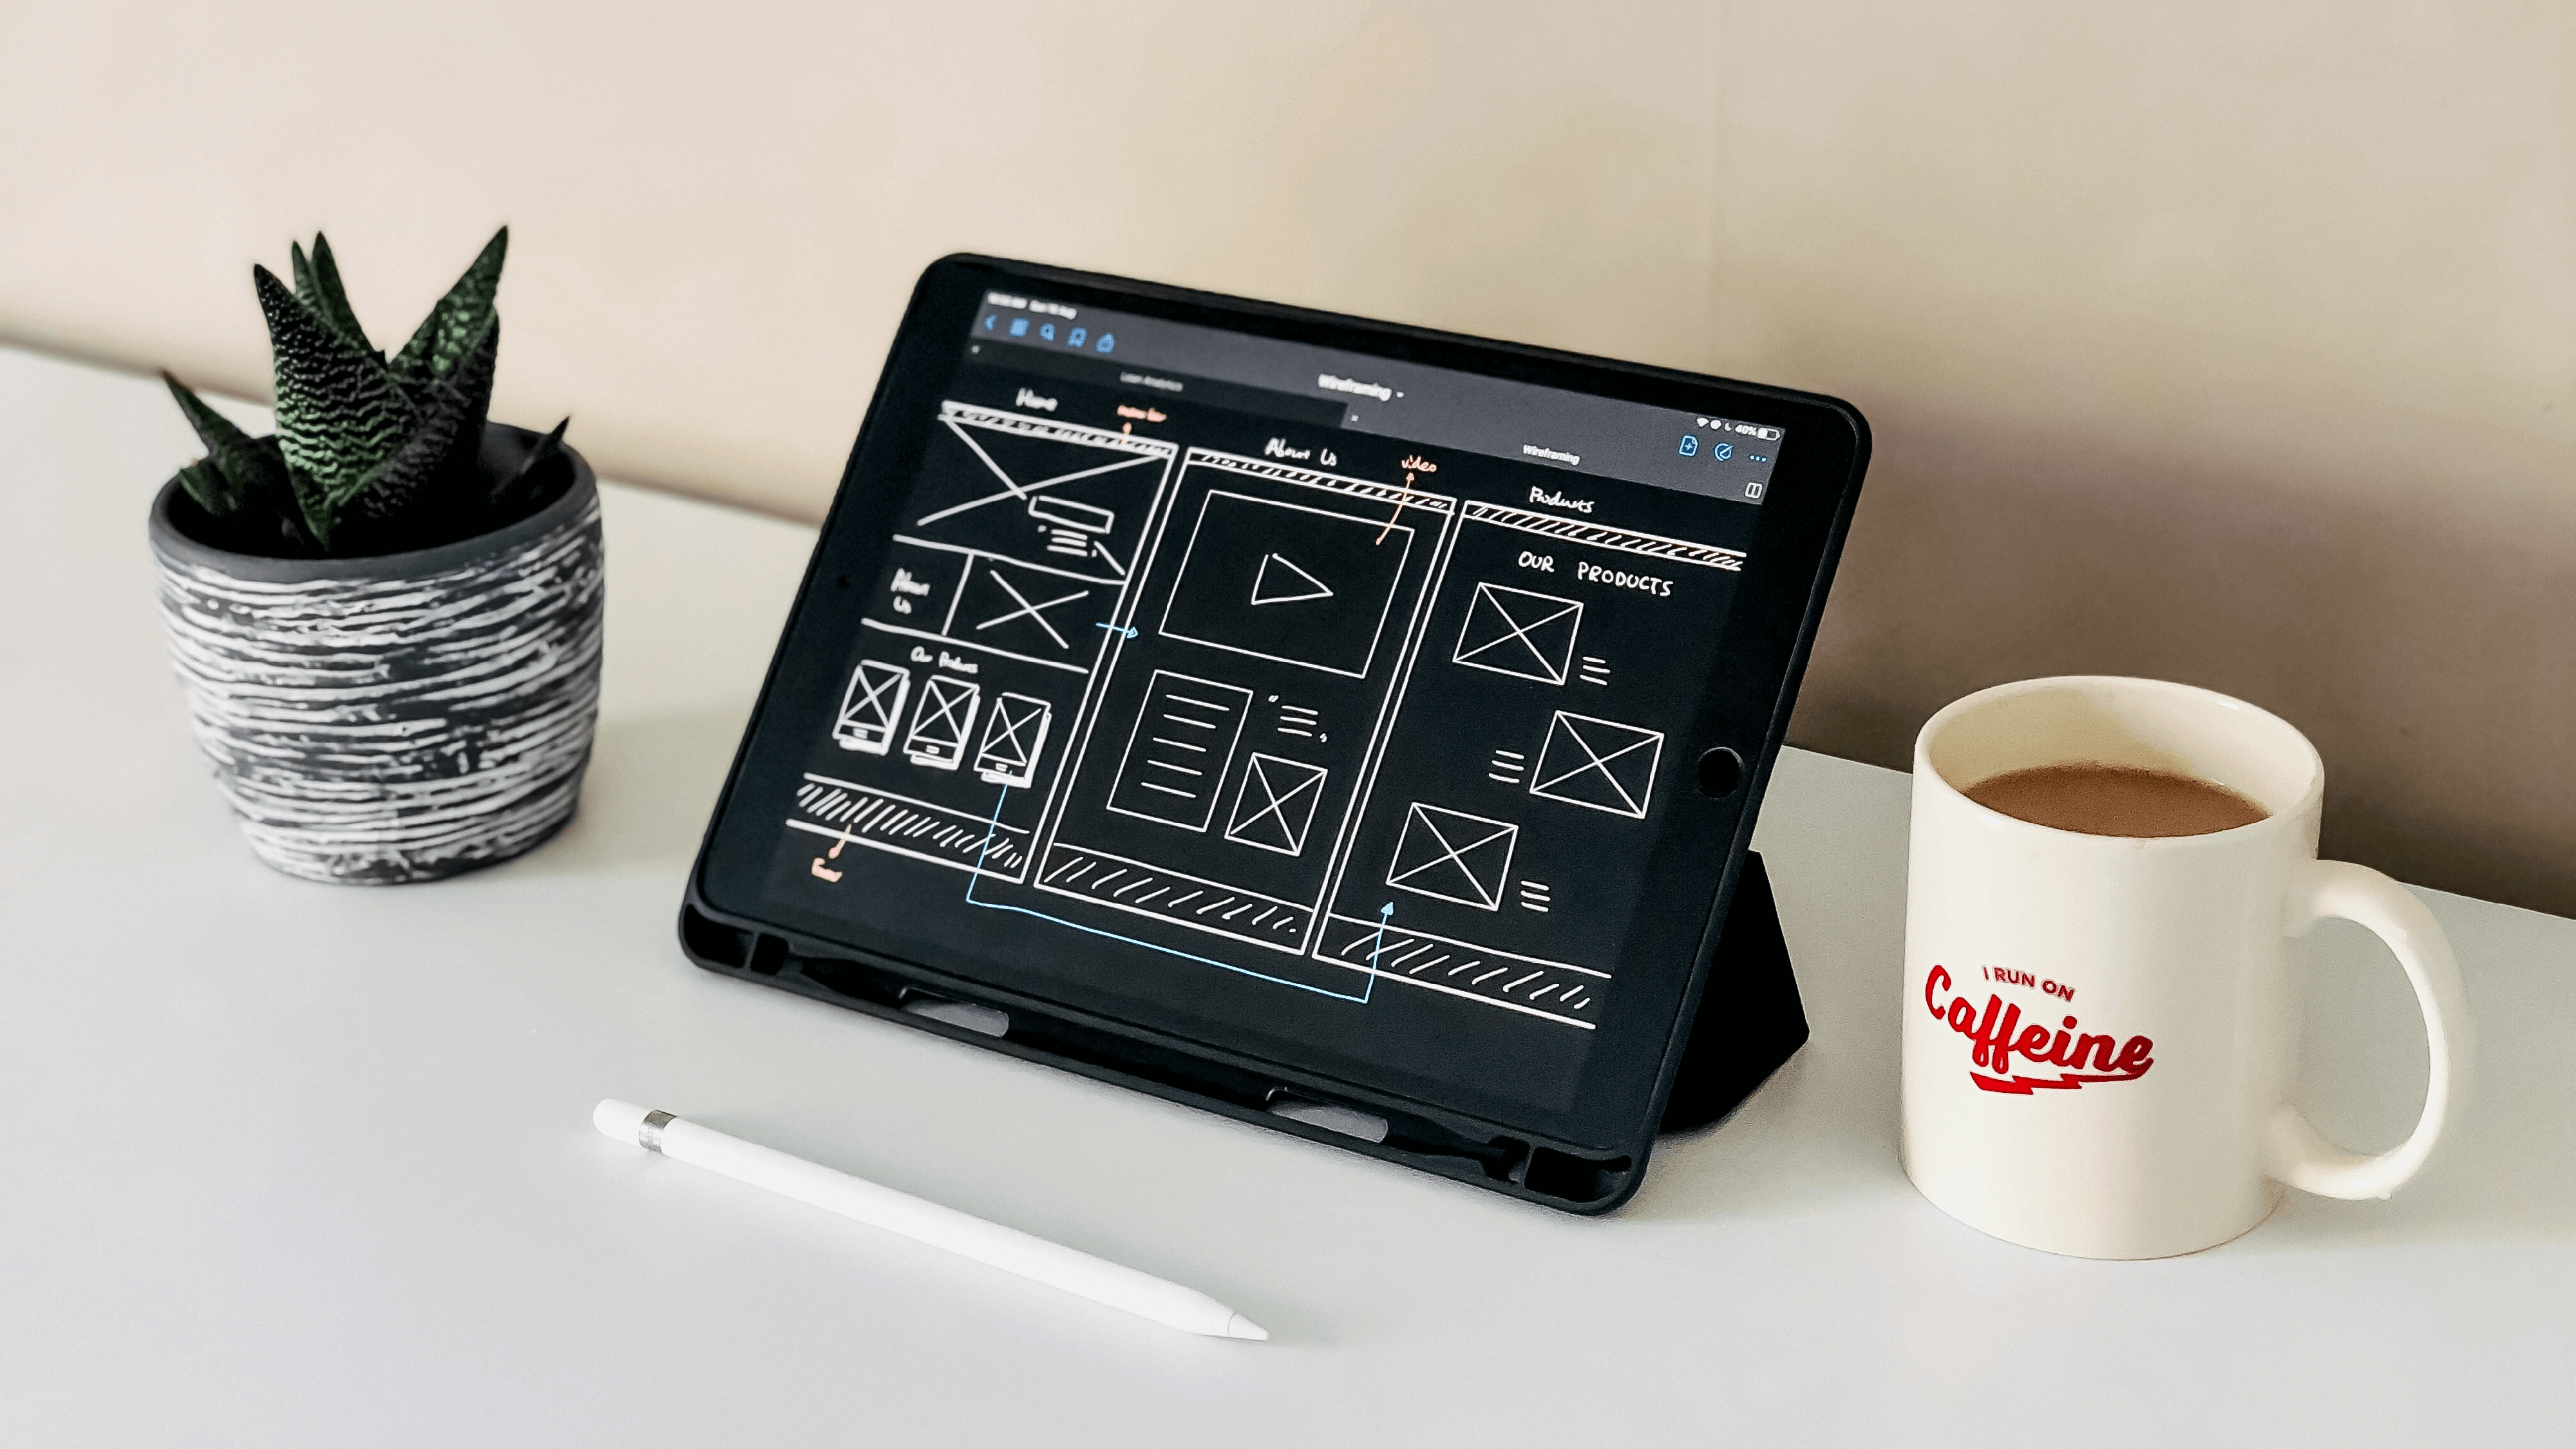 Coffee cup and iPad on desk displaying application wireframe.